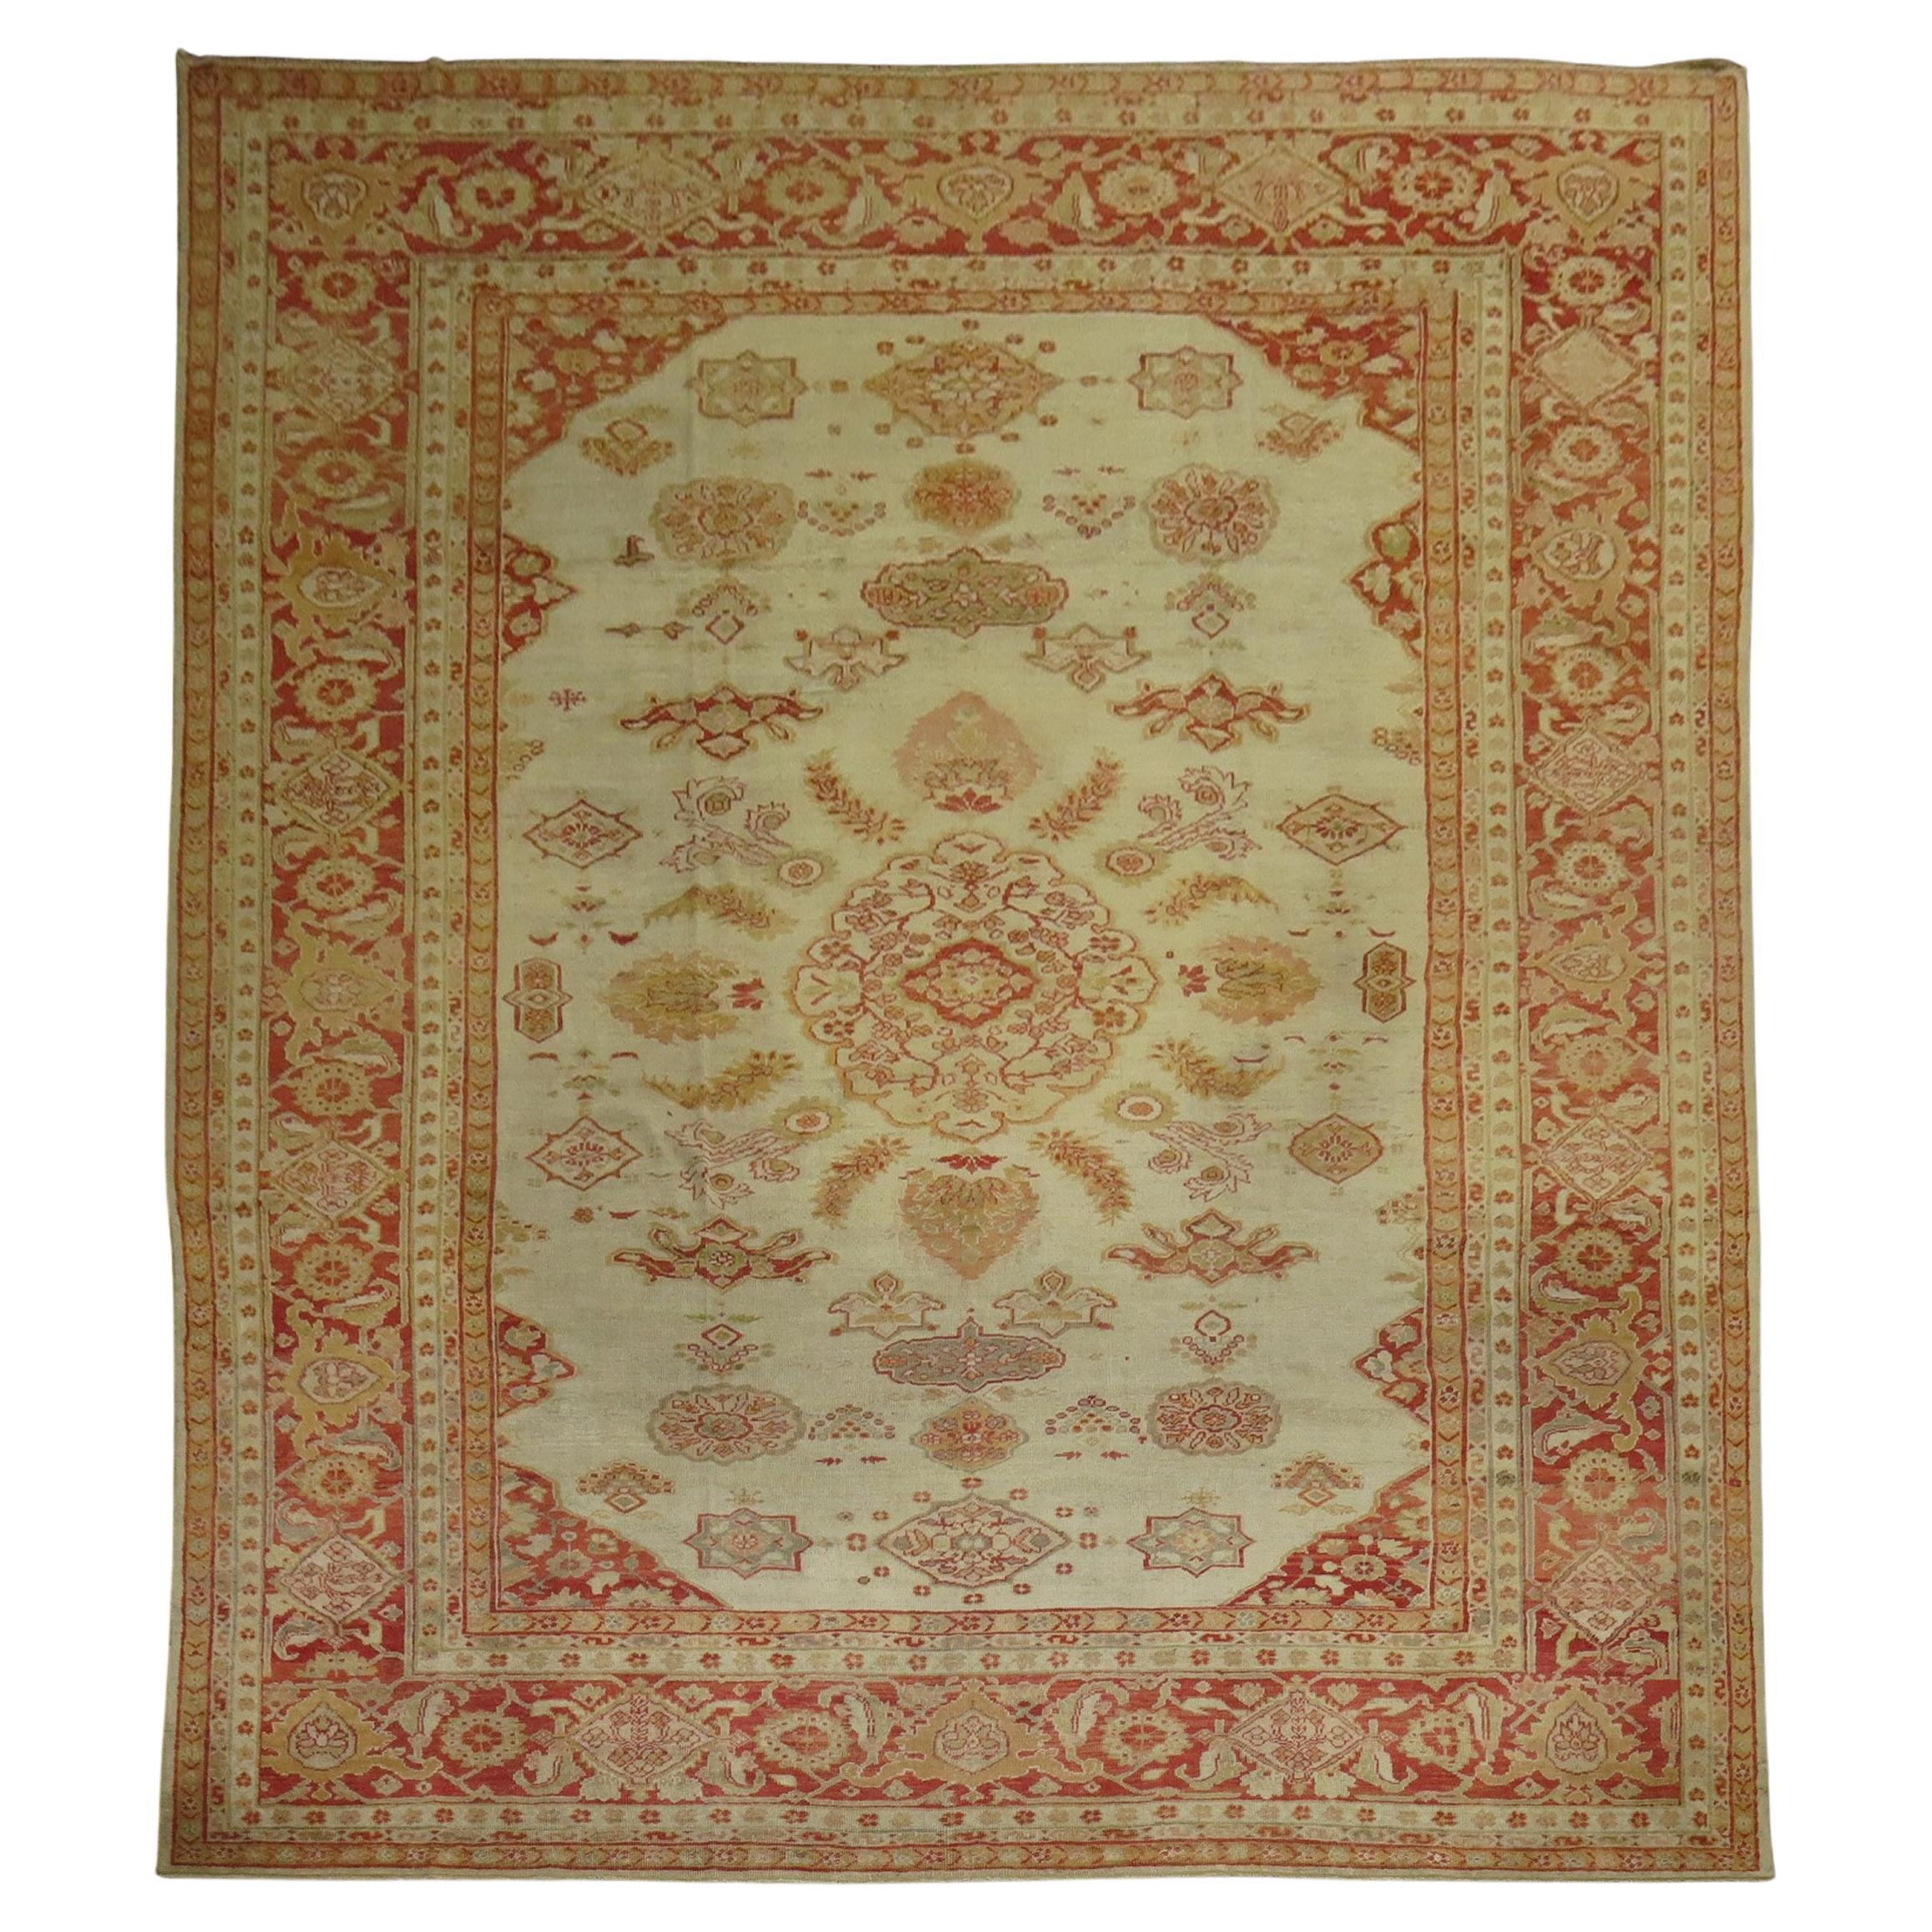 Antique Ivory Sultanabad Persian Carpet